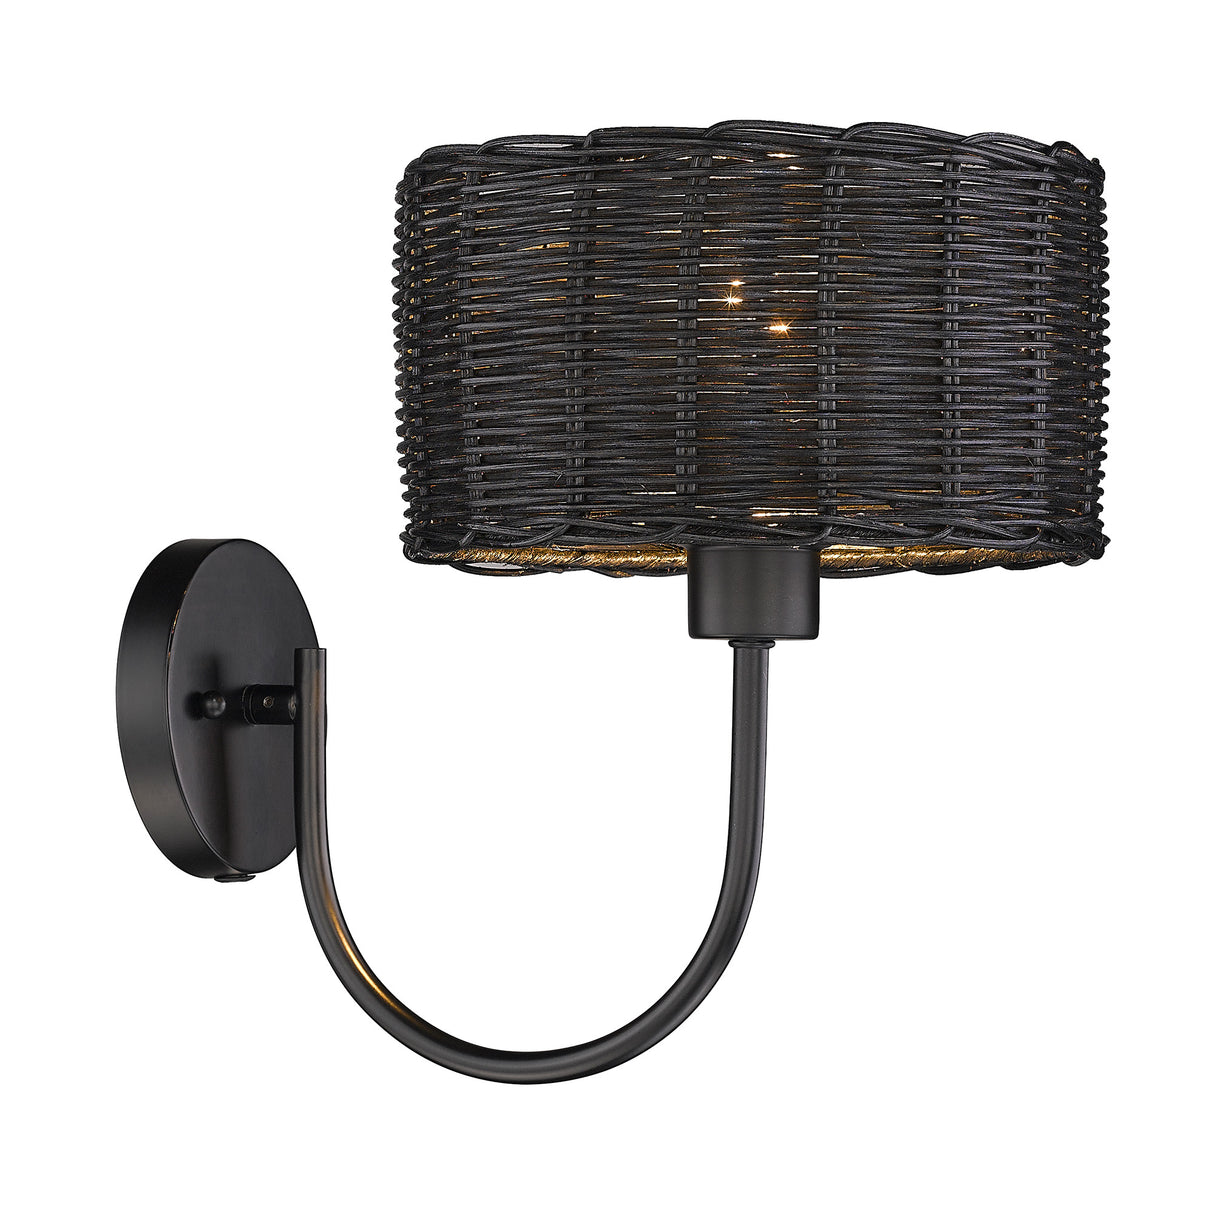 Erma 1 Light Wall Sconce in Matte Black with Black Wicker Shade